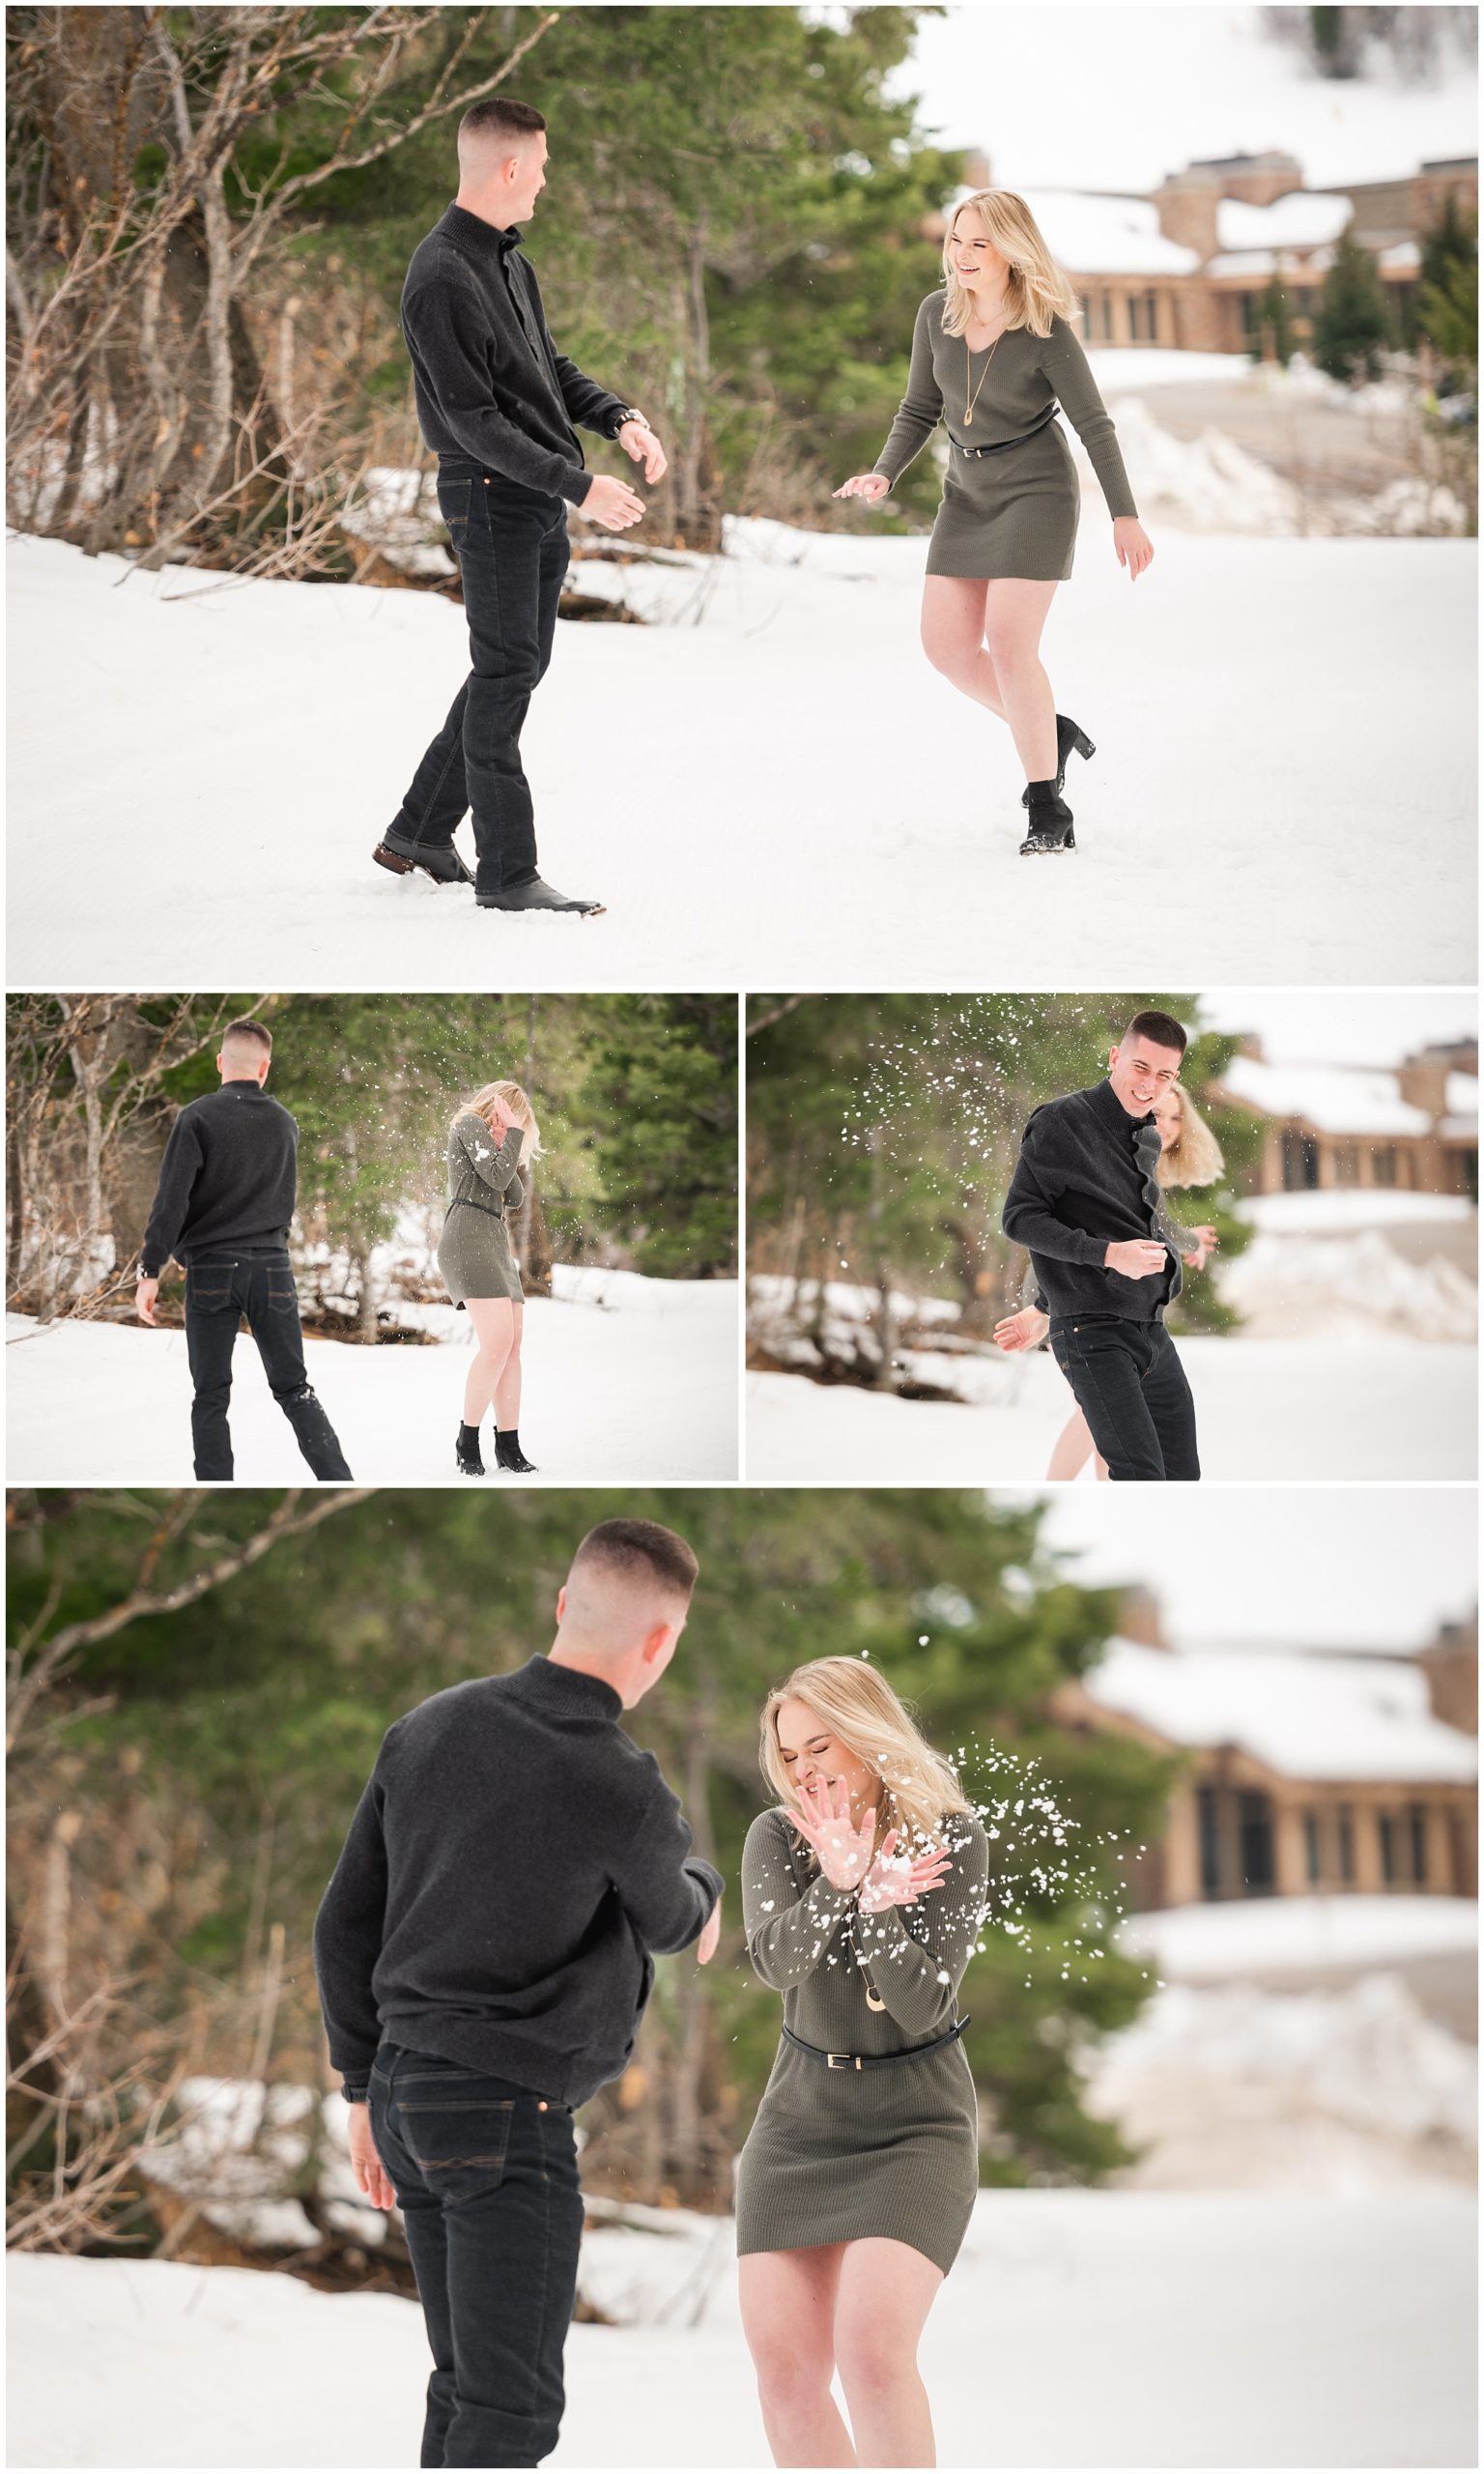 Couple having snowball fight in the snow during mountain destination engagement session in Utah | Wearing olive colored dress with black floppy hat and black sweater and black pants | Snowbasin Resort Snowy Engagement Session | Jessie and Dallin Photography